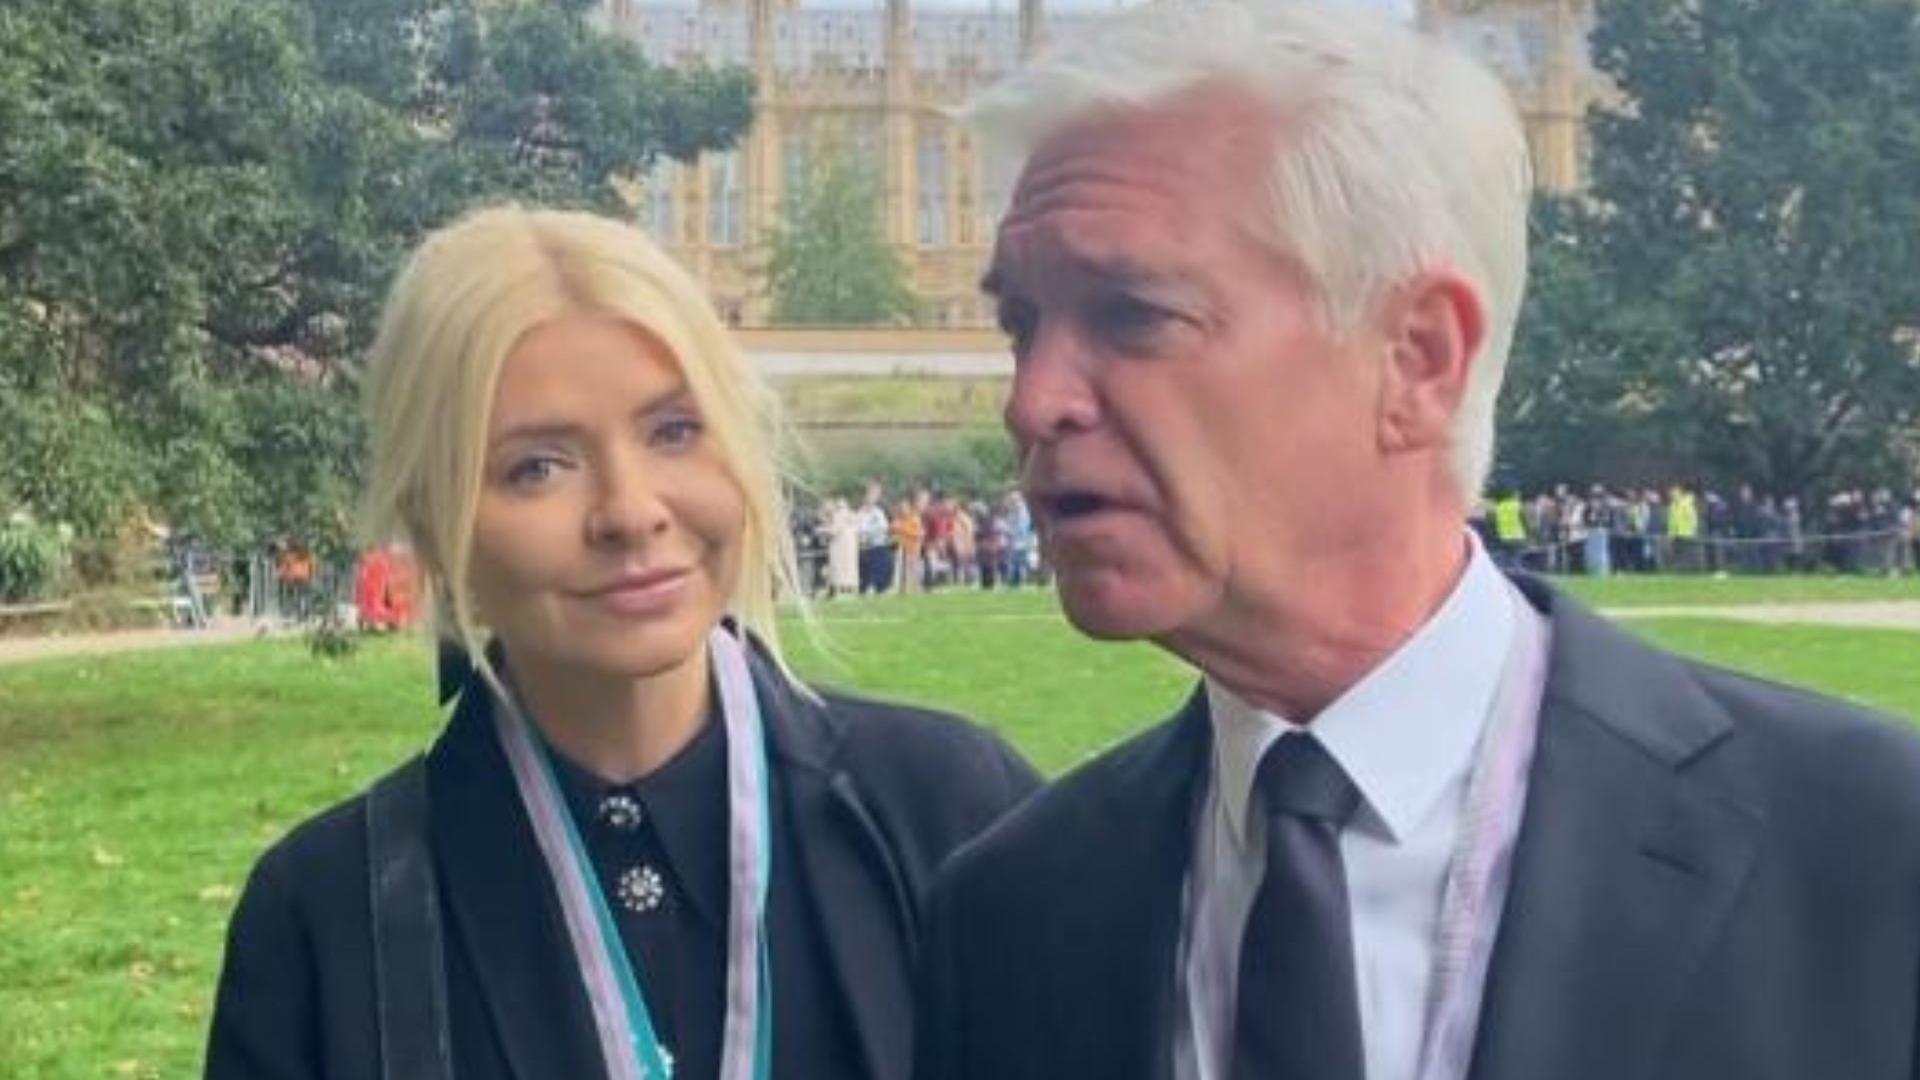 Holly Willoughby, Phillip Schofield row in the queue UPDATE: 72,000 signatures are received for a petition to have the iconic duo AXED From TV